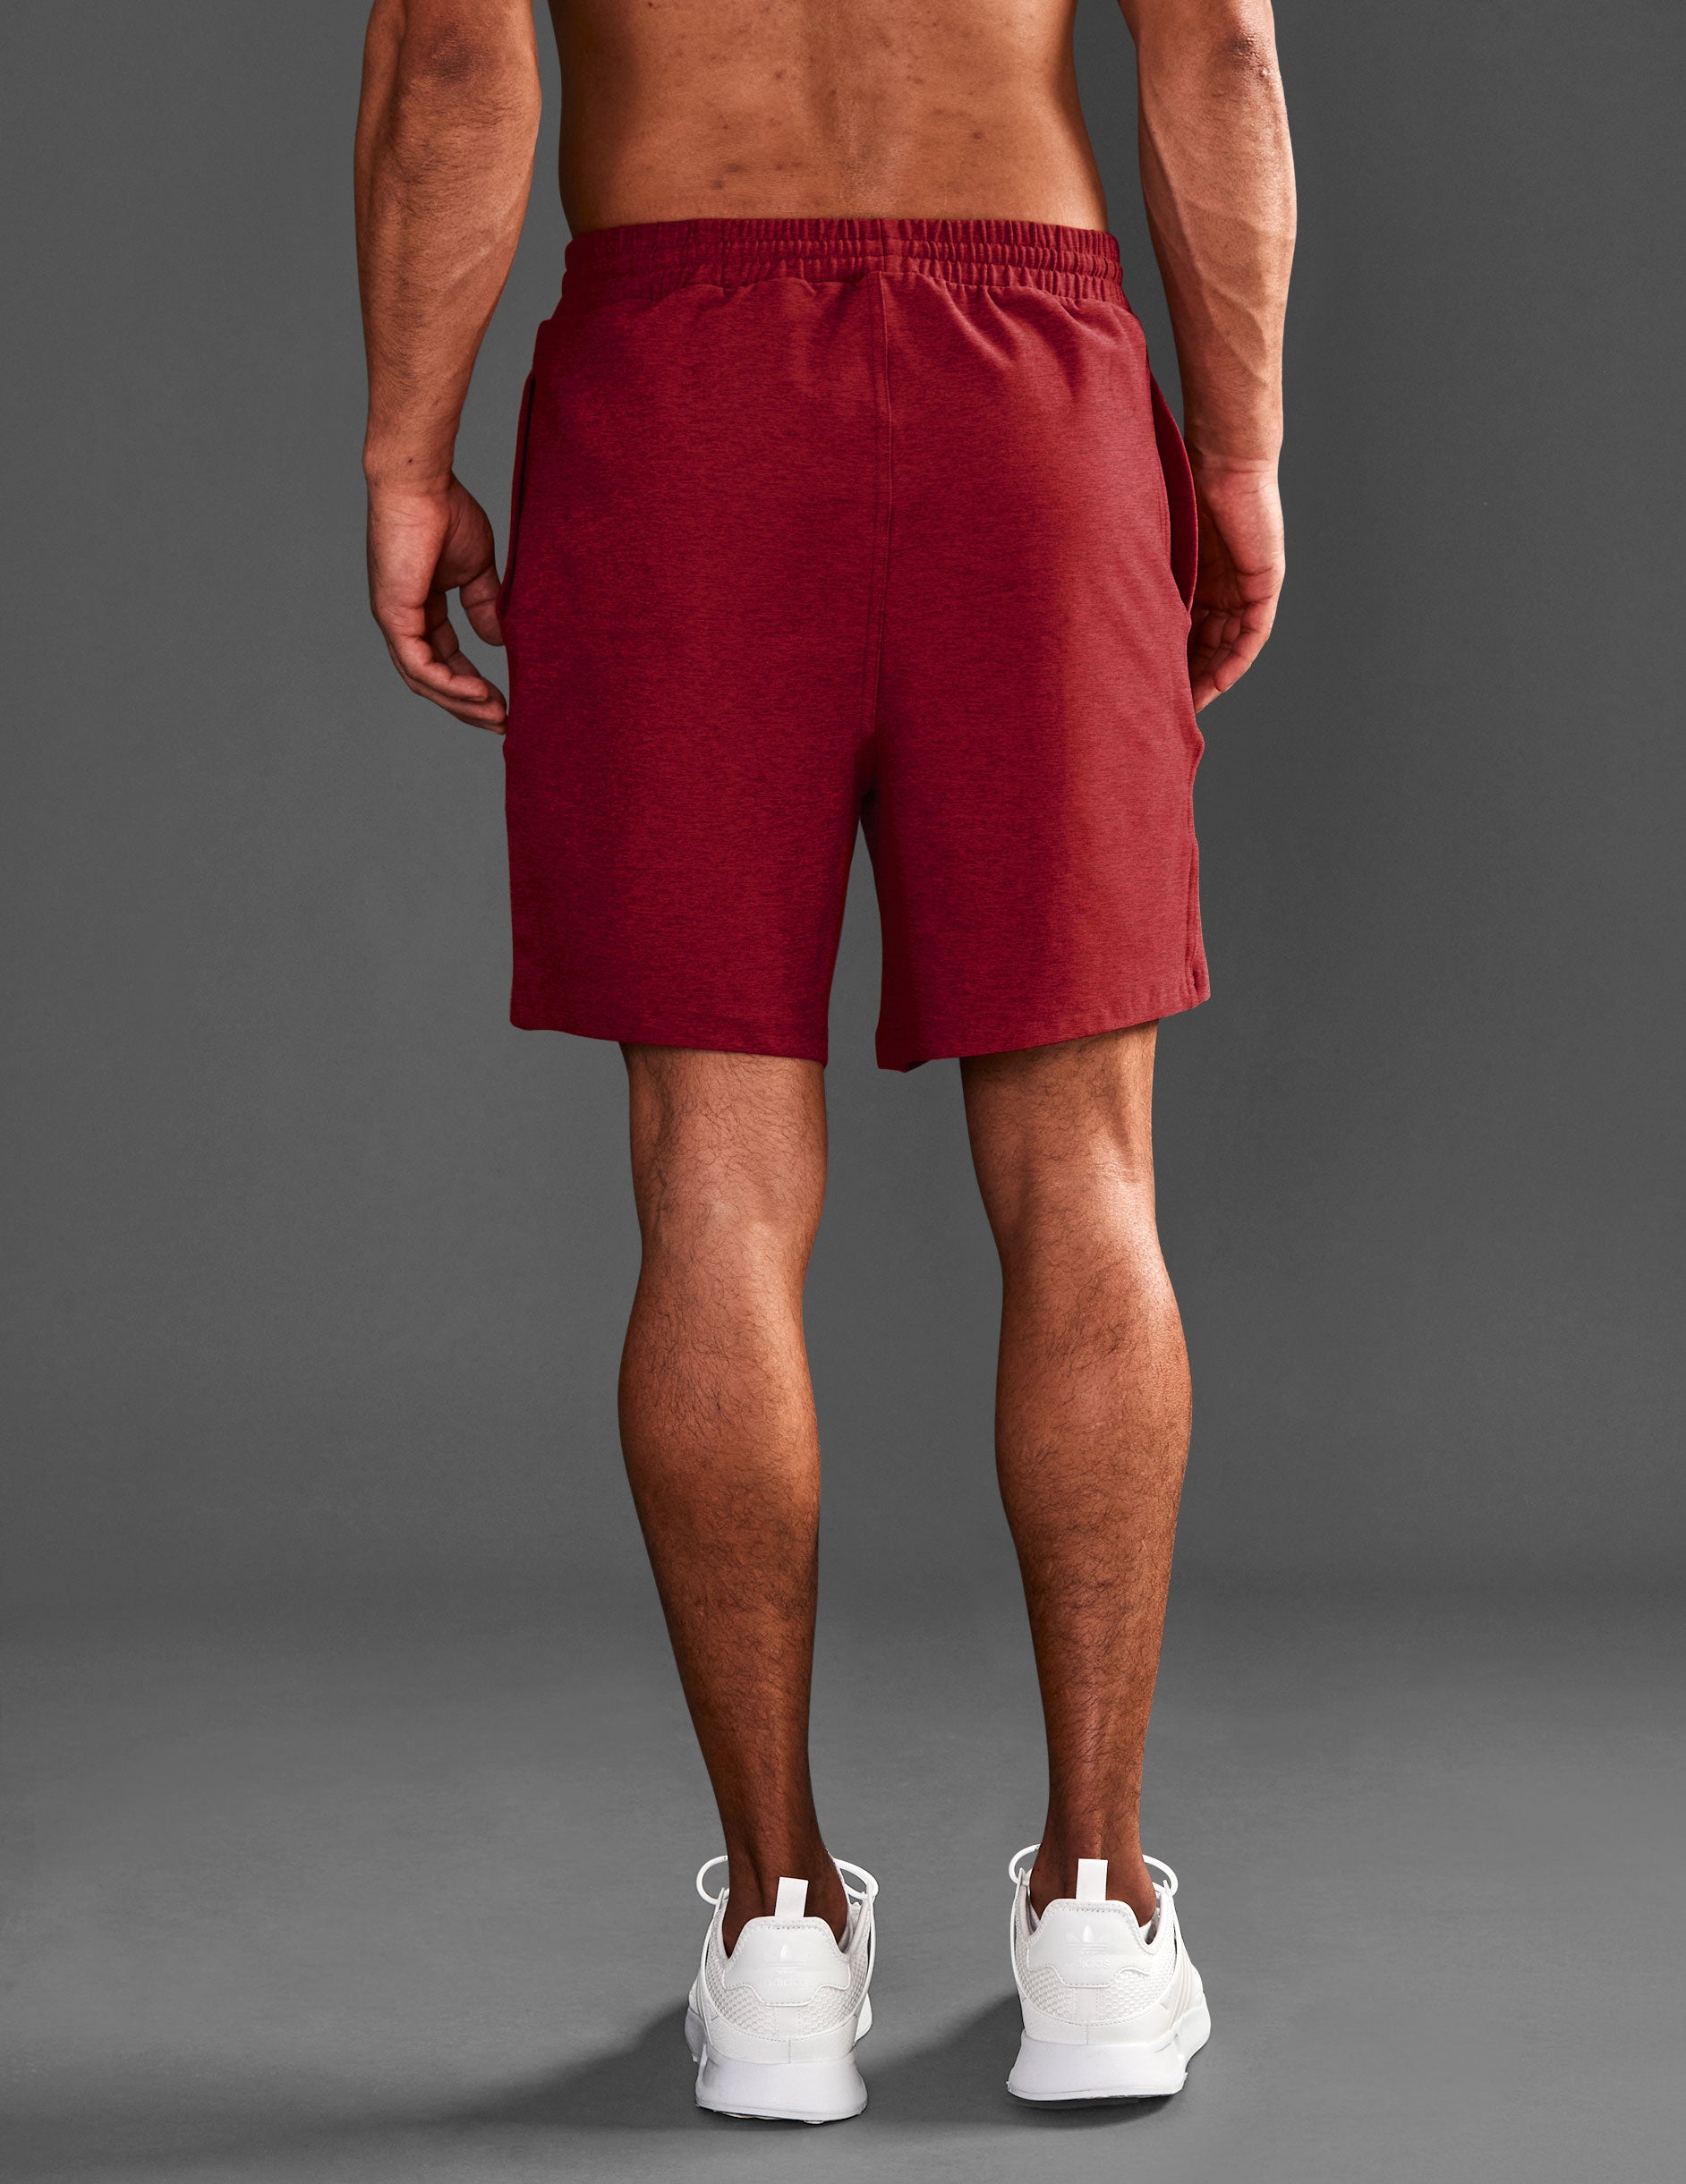 red men's shorts